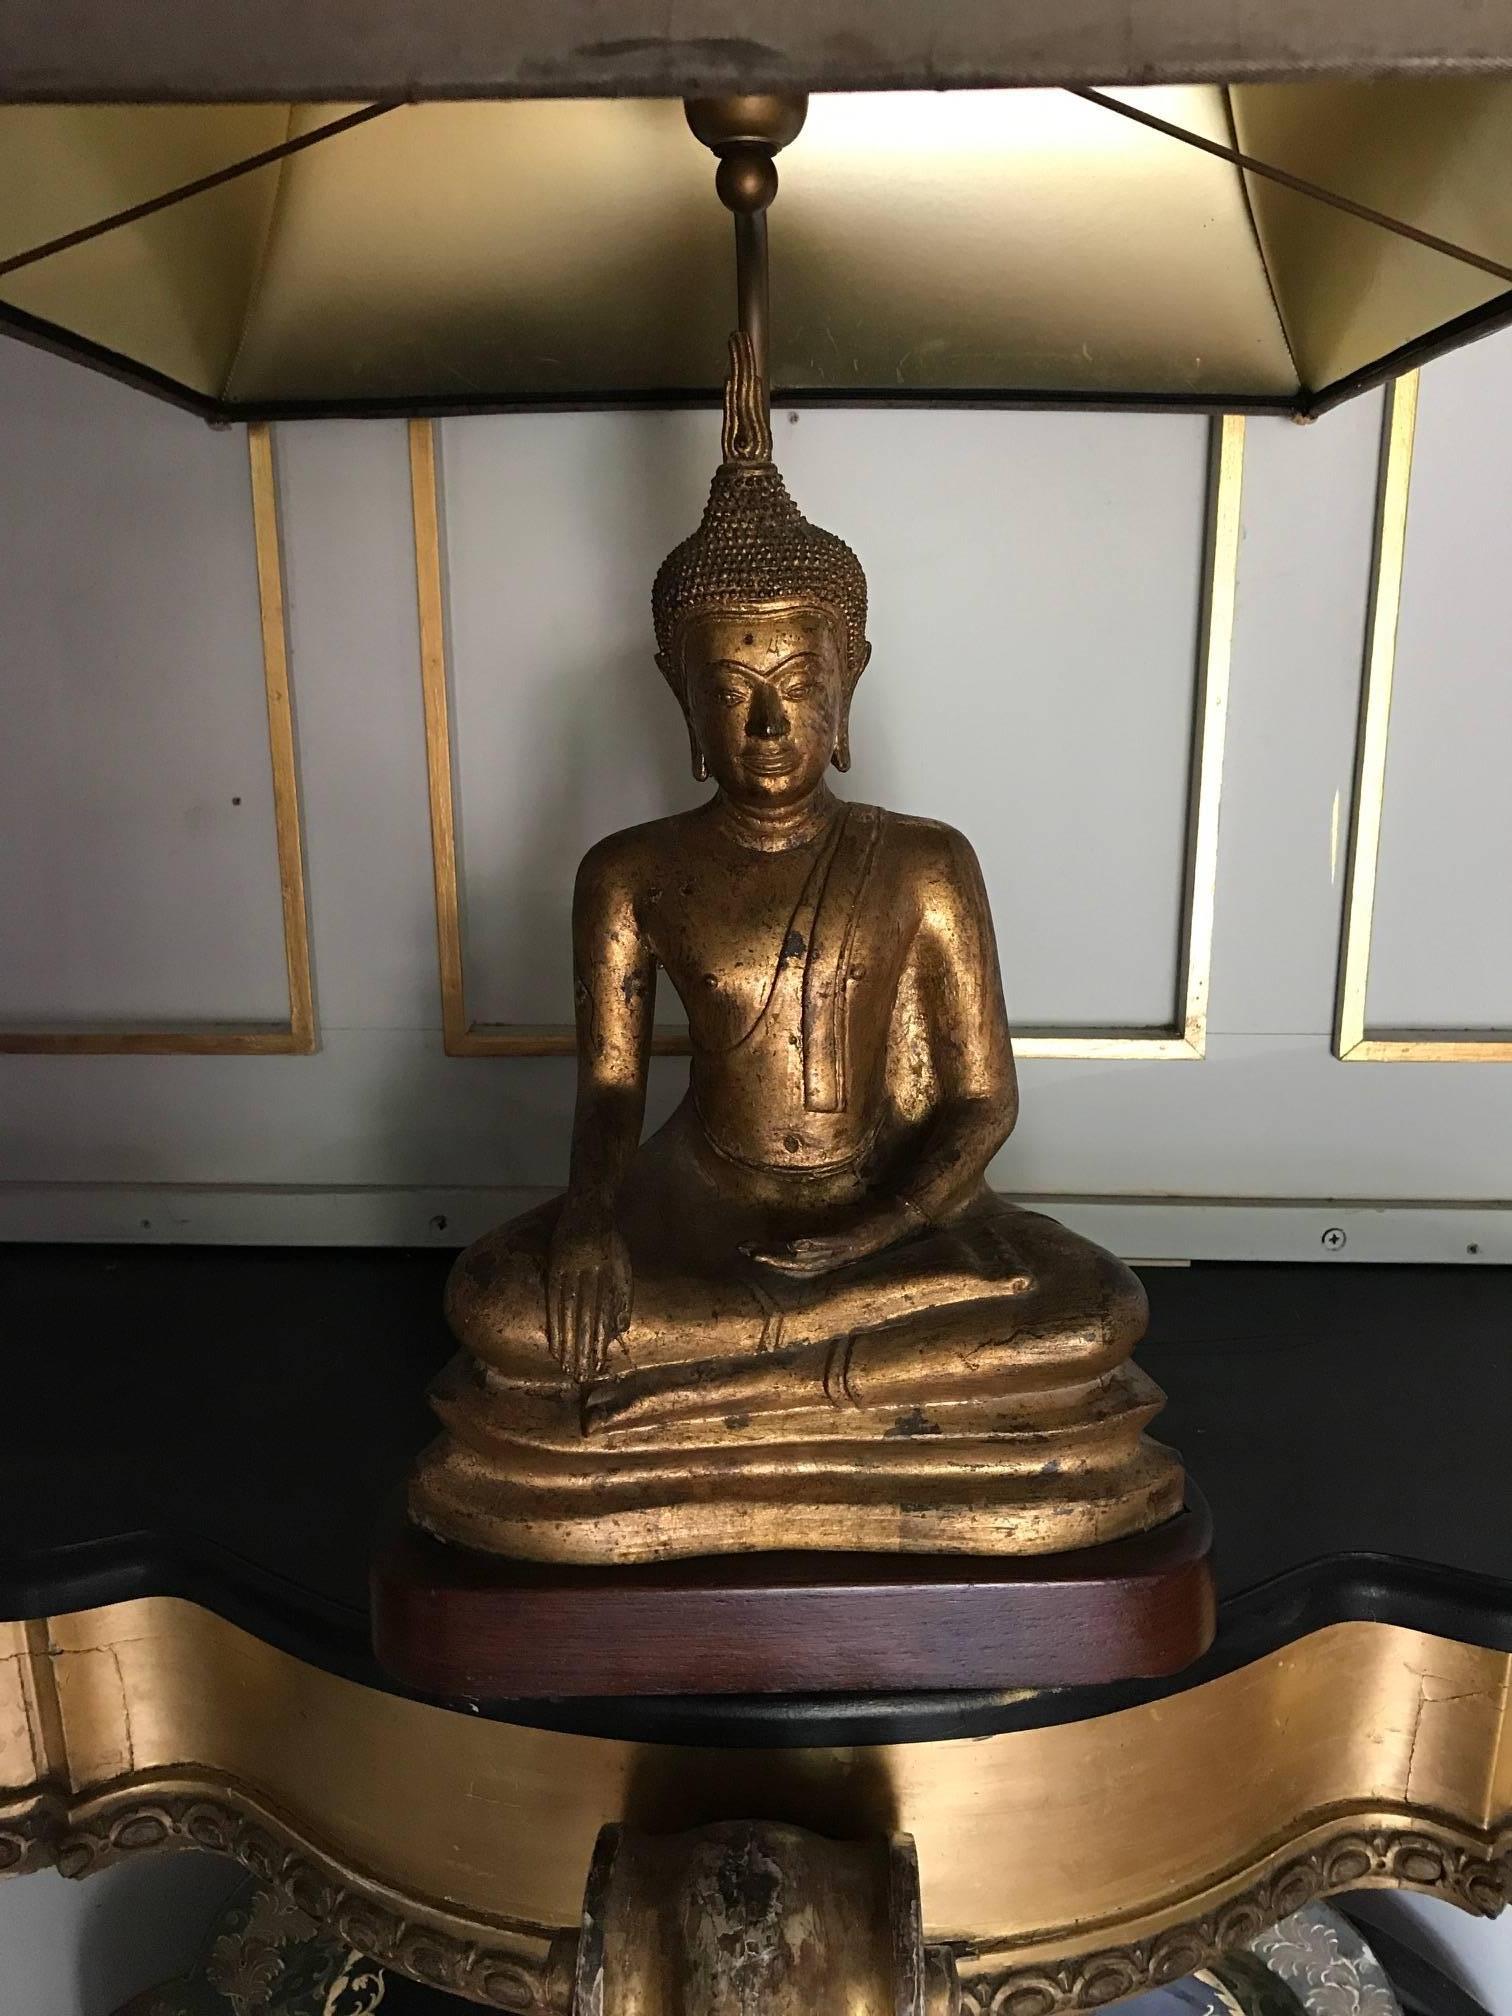 A stunning gilded metal Buddha lamp on a heavy wooden base. Shown here with its original silk shade. The shade has some water marks and wear to the braiding, so could be changed or recovered, though works perfectly well as it is.